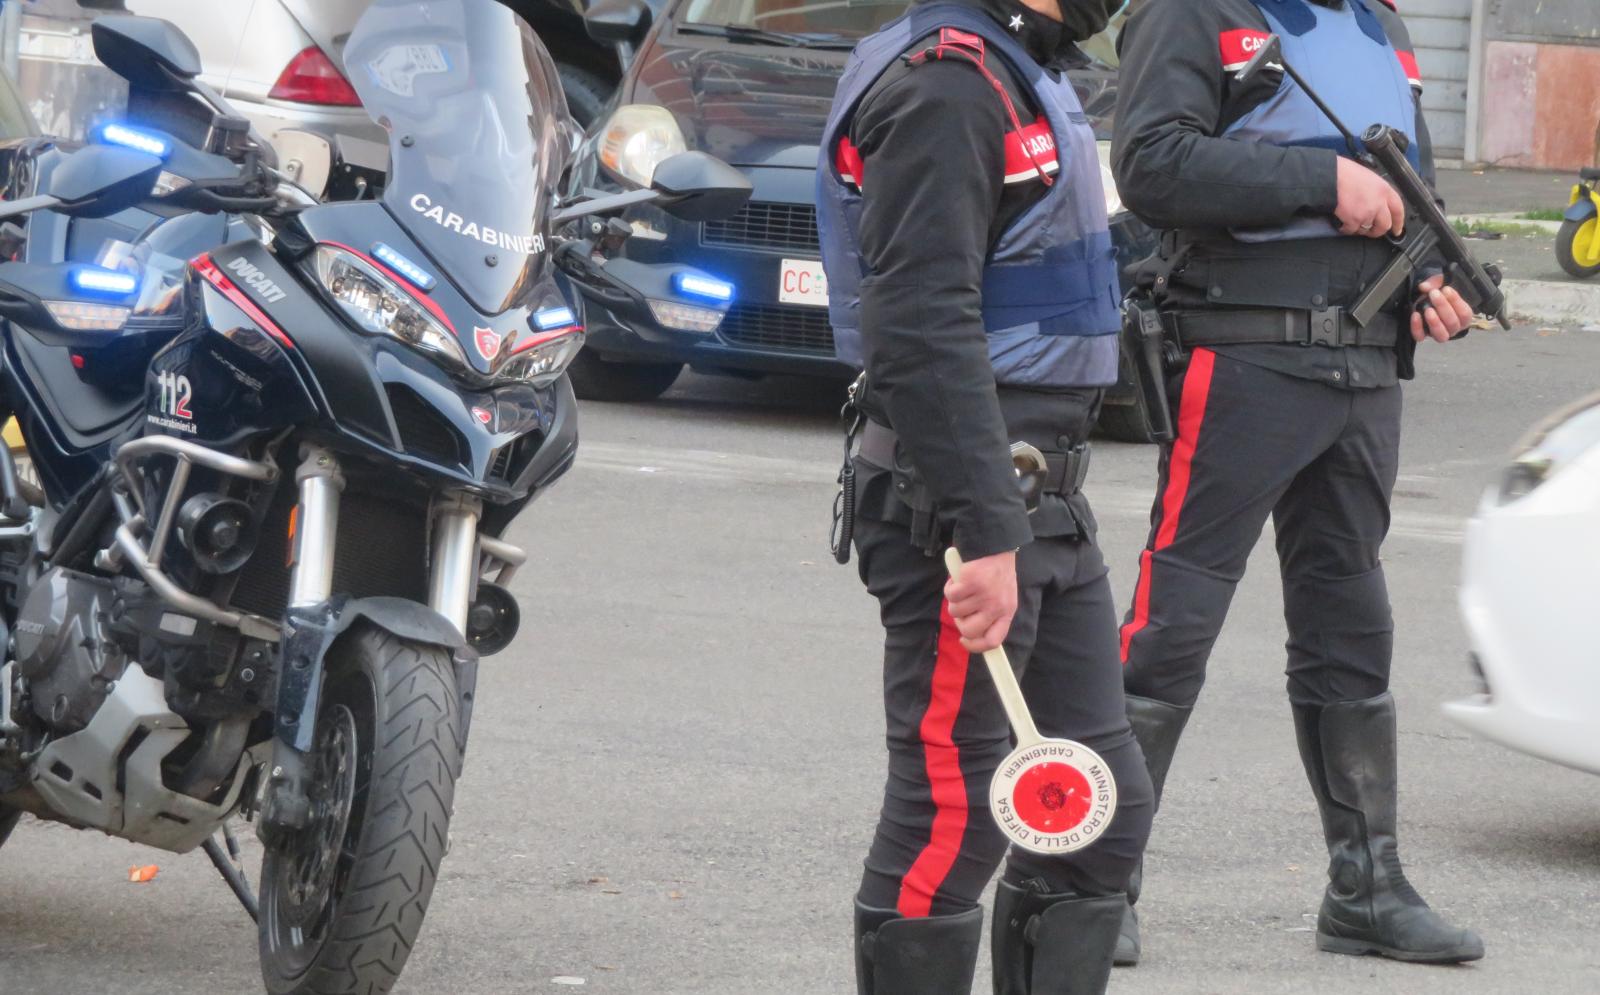 Italian security forces - 